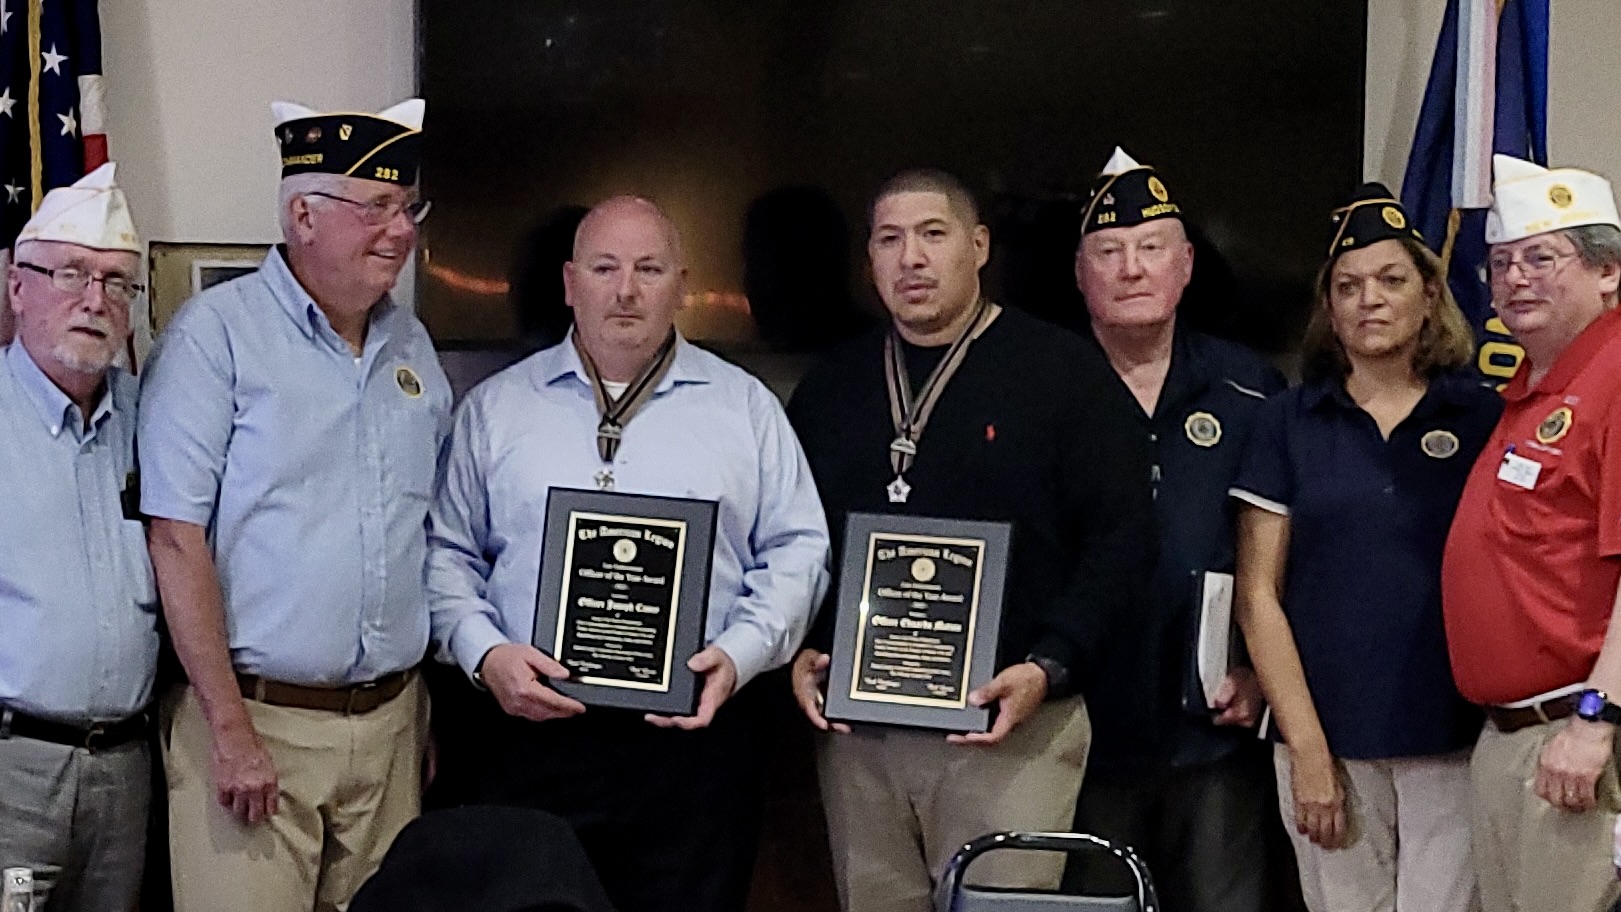 American Legion Honors Local Policemen Who Saved Infant